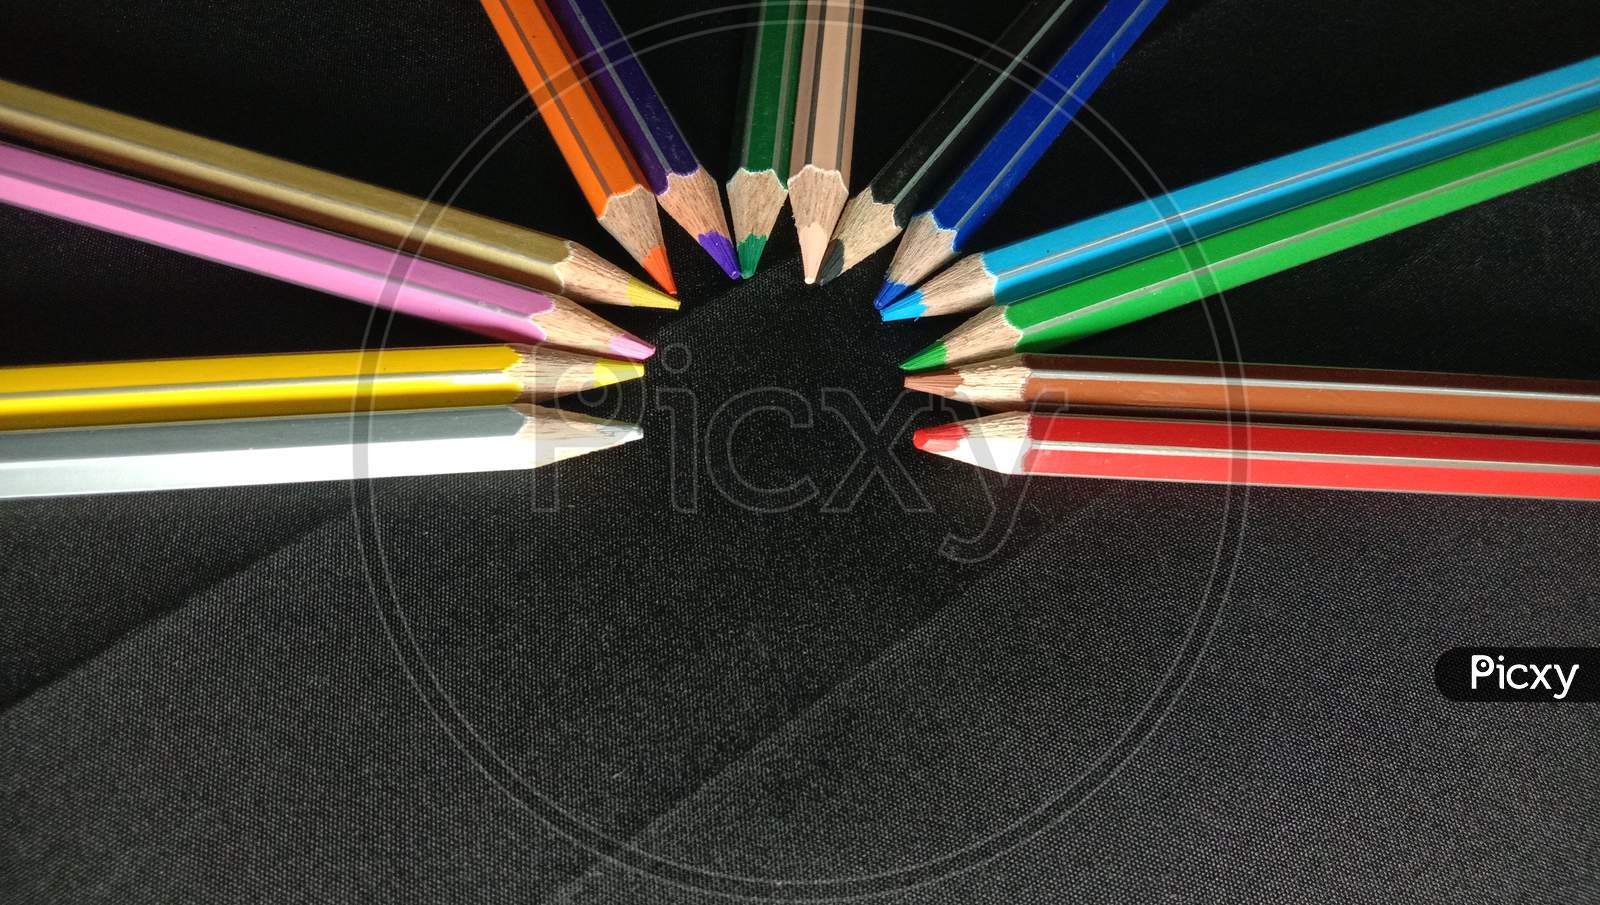 Multiple Colored Wooden Pencil Stock